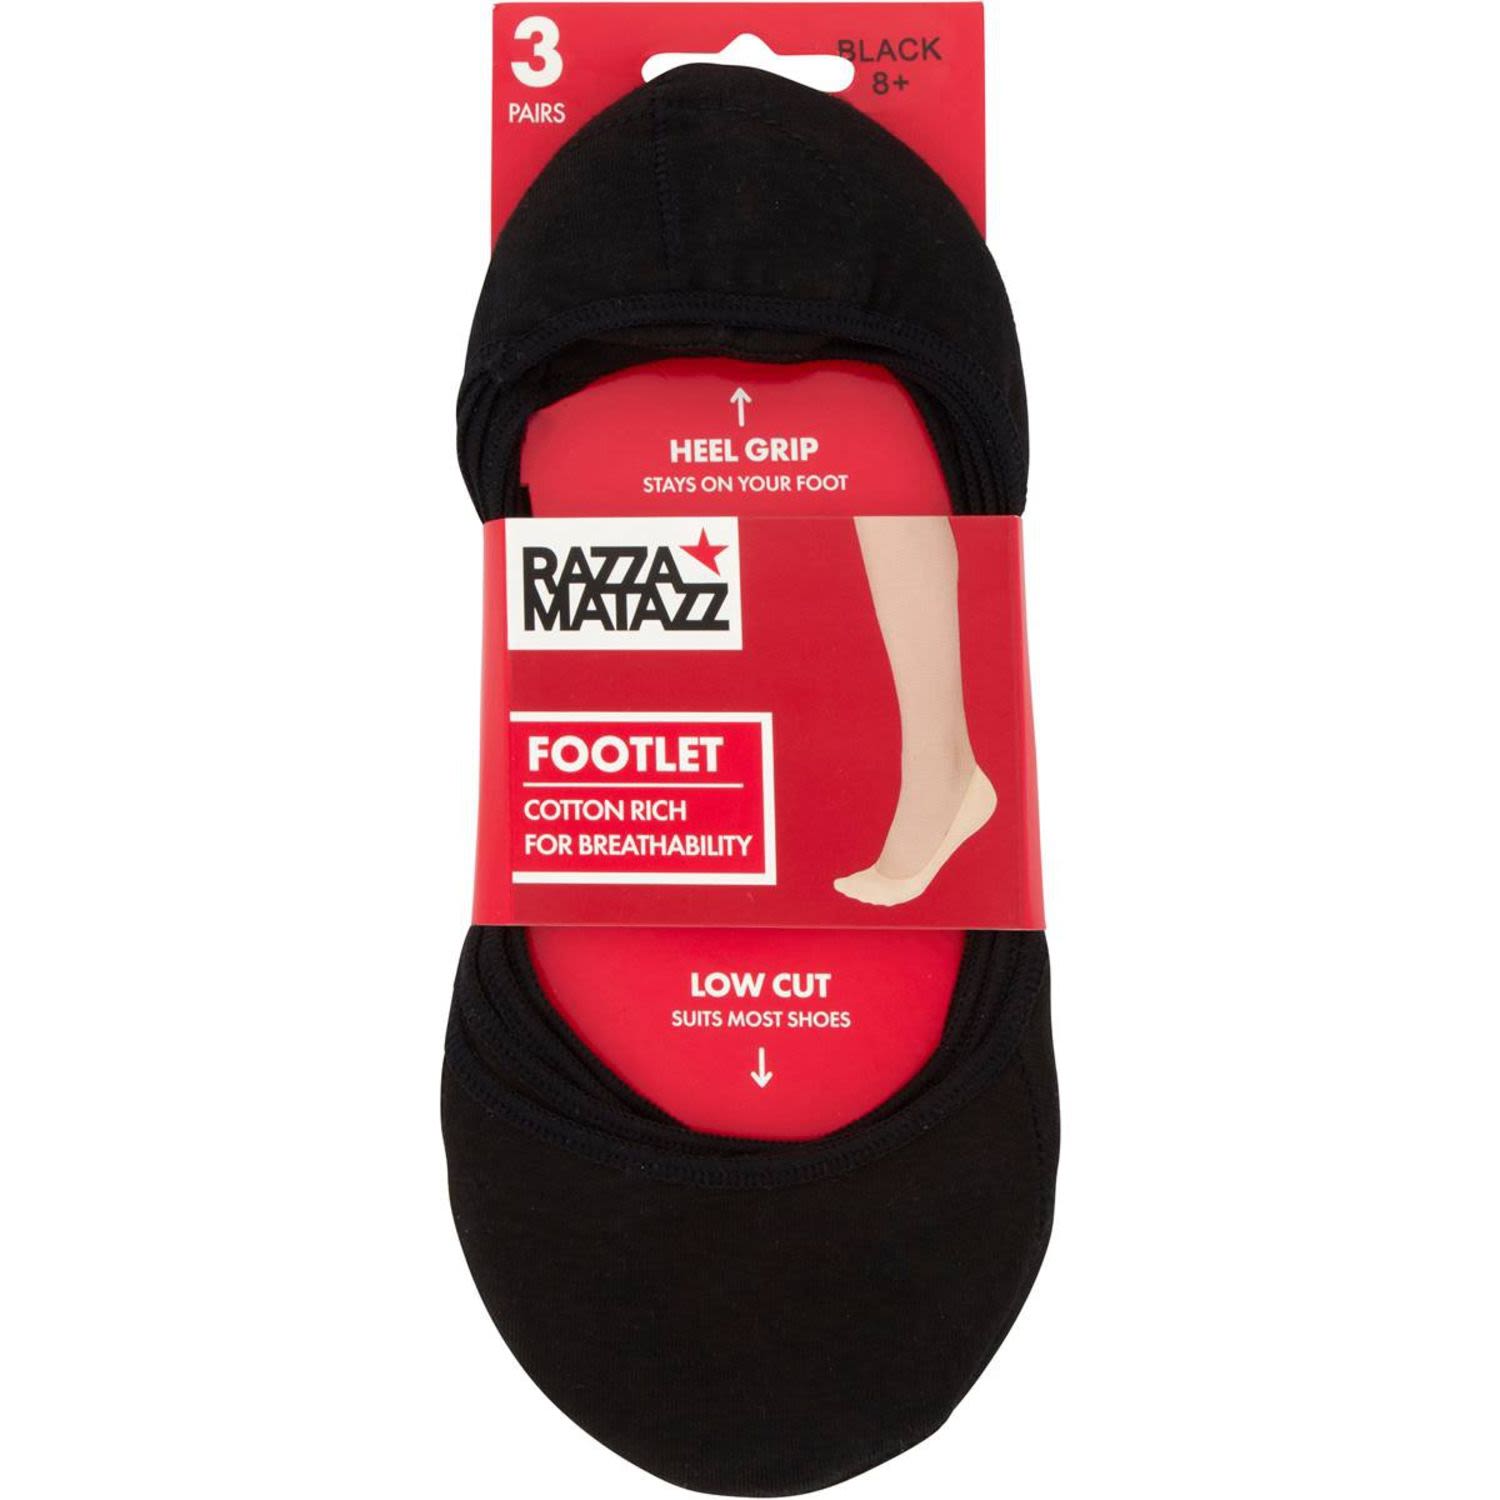 Razzamatazz Footlet Assorted 3 To 8, 3 Each